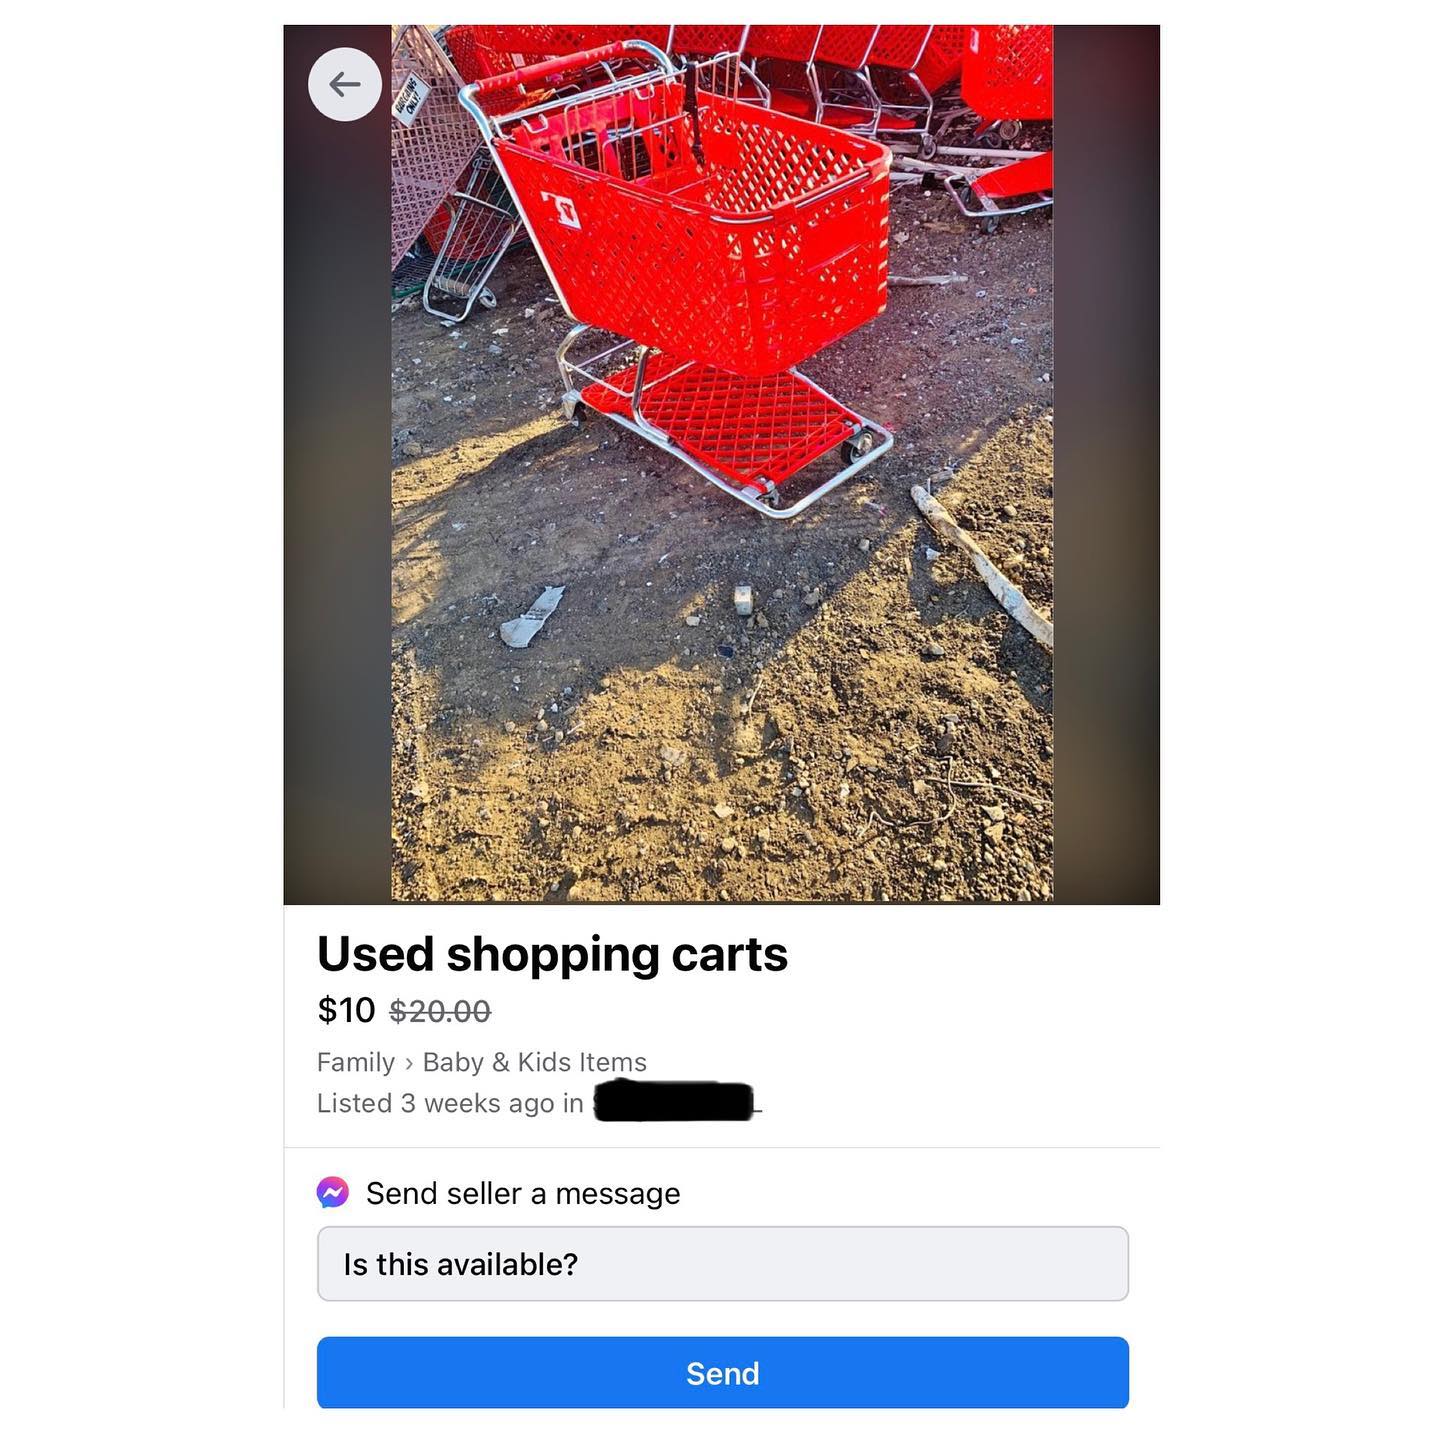 Red shopping cart pictured in ad for someone selling used (possibly stolen) shopping carts